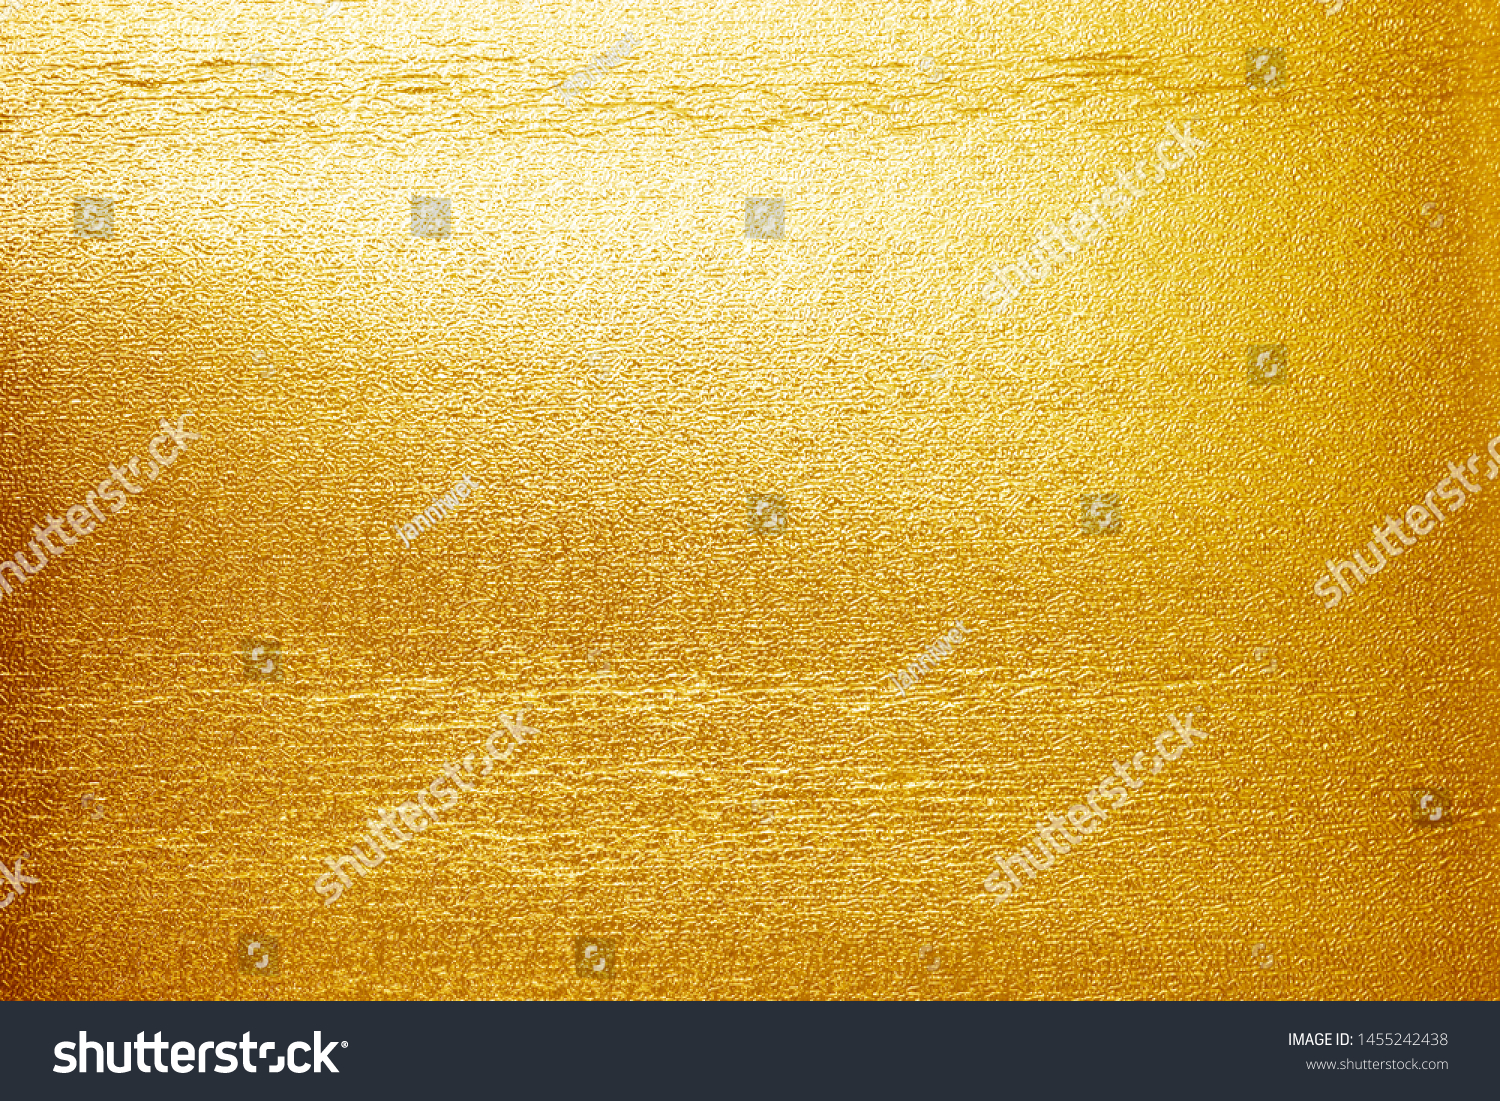 Shiny yellow leaf  gold foil texture background #1455242438